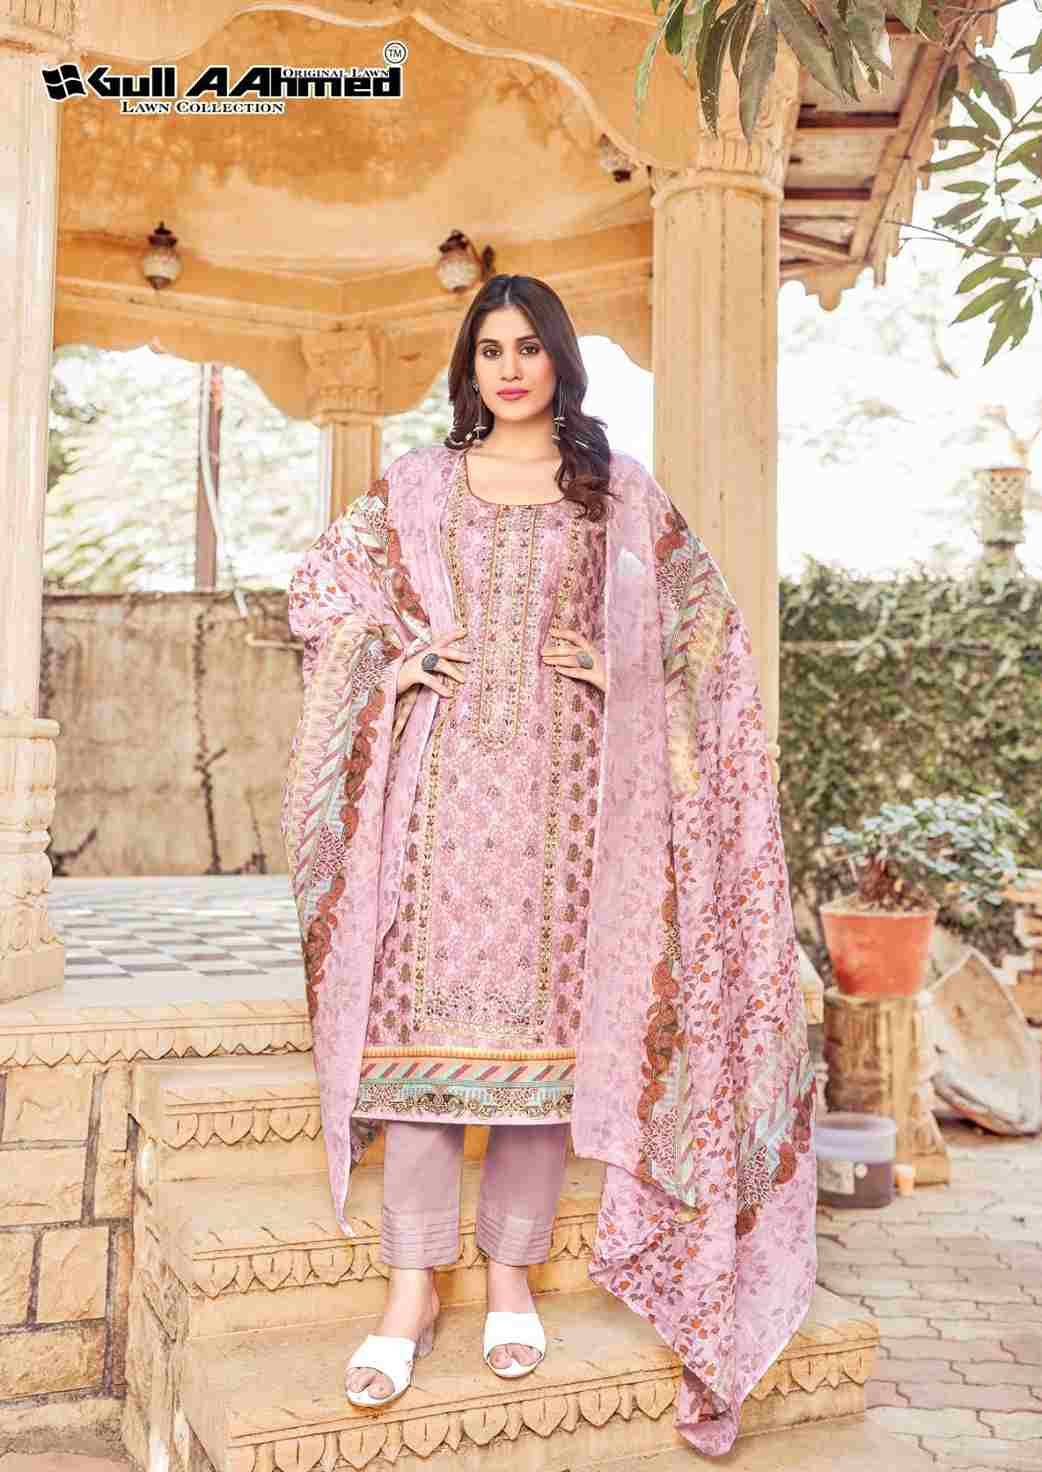 Bin Saeed Vol-3 By Gull Aahmed 3001 To 3006 Series Beautiful Festive Suits Colorful Stylish Fancy Casual Wear & Ethnic Wear Pure Lawn Print Dresses At Wholesale Price